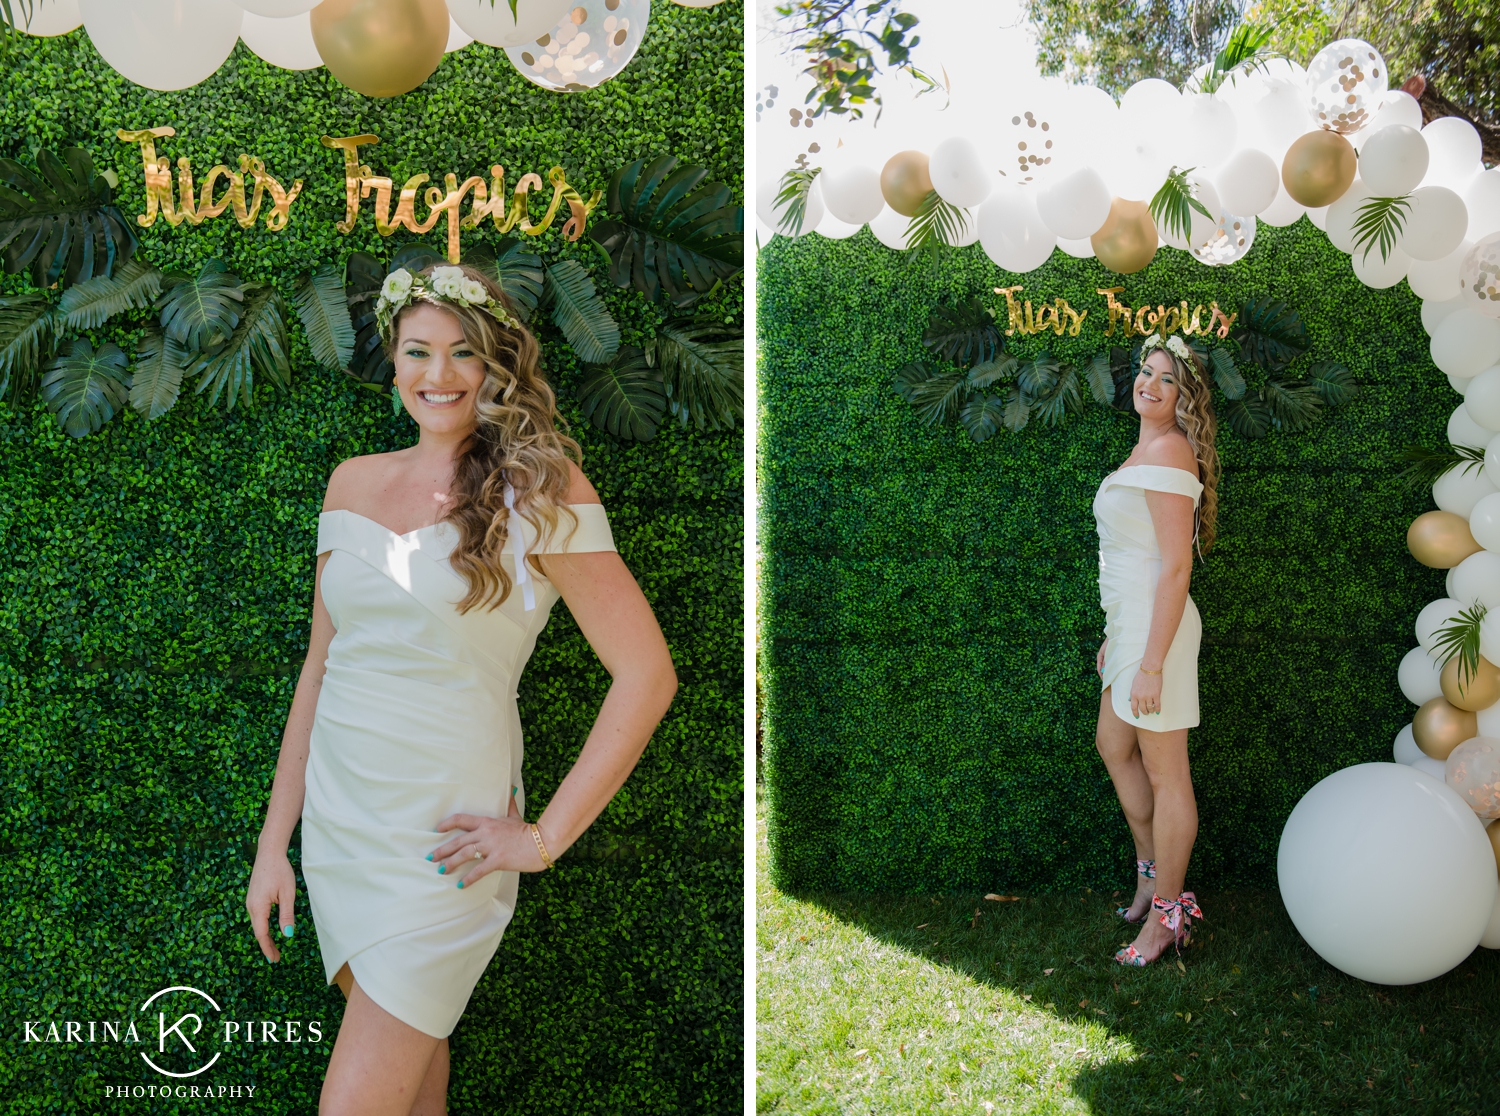 Bridal shower and wedding photography by Karina Pires Photography